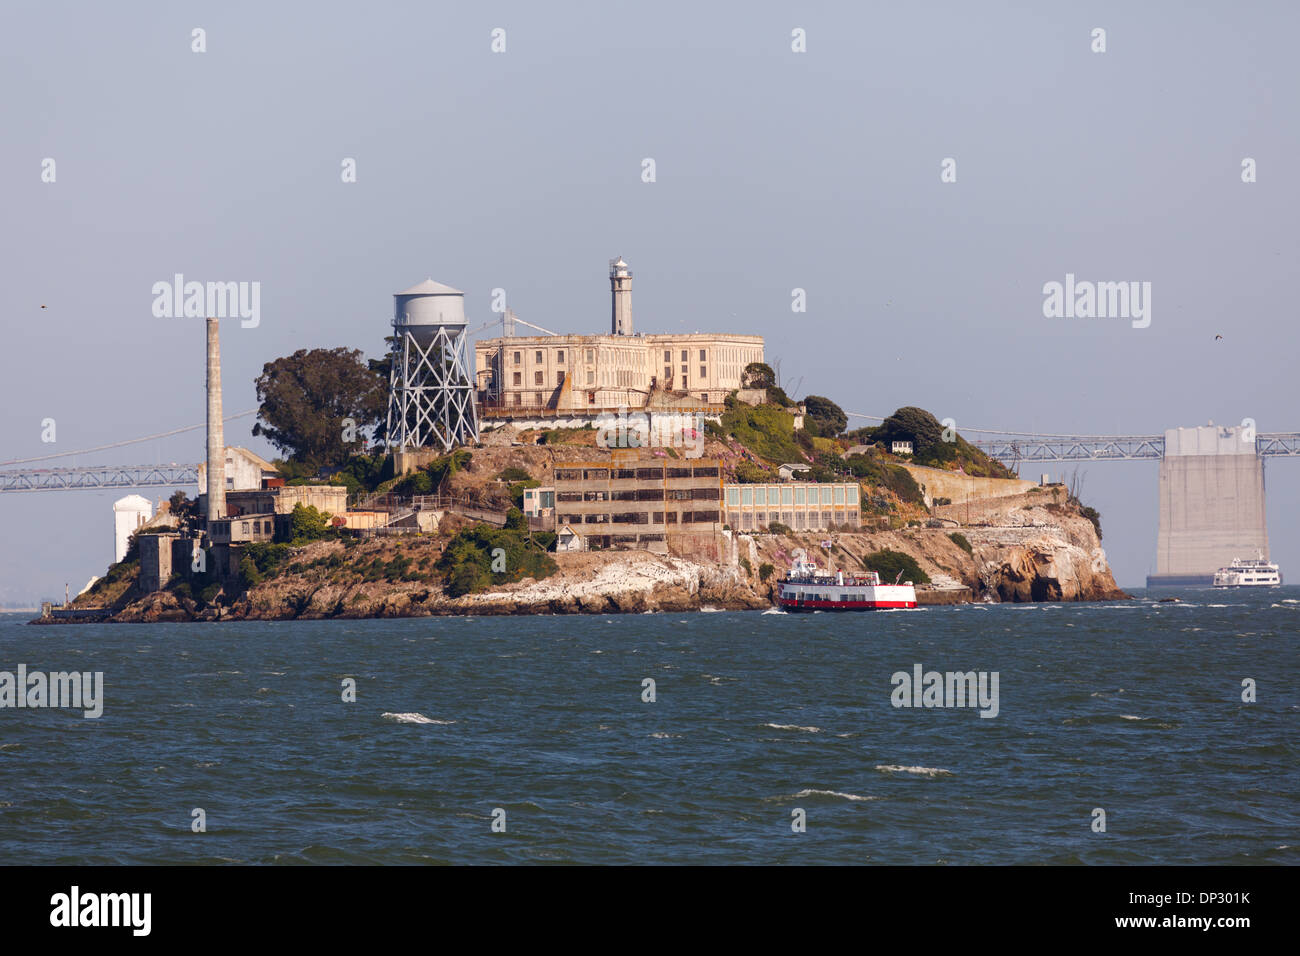 Alcatraz Island Federal Penitentiary was a world-famous high-security prison from 1934 to 1963, now recreation area. Stock Photo